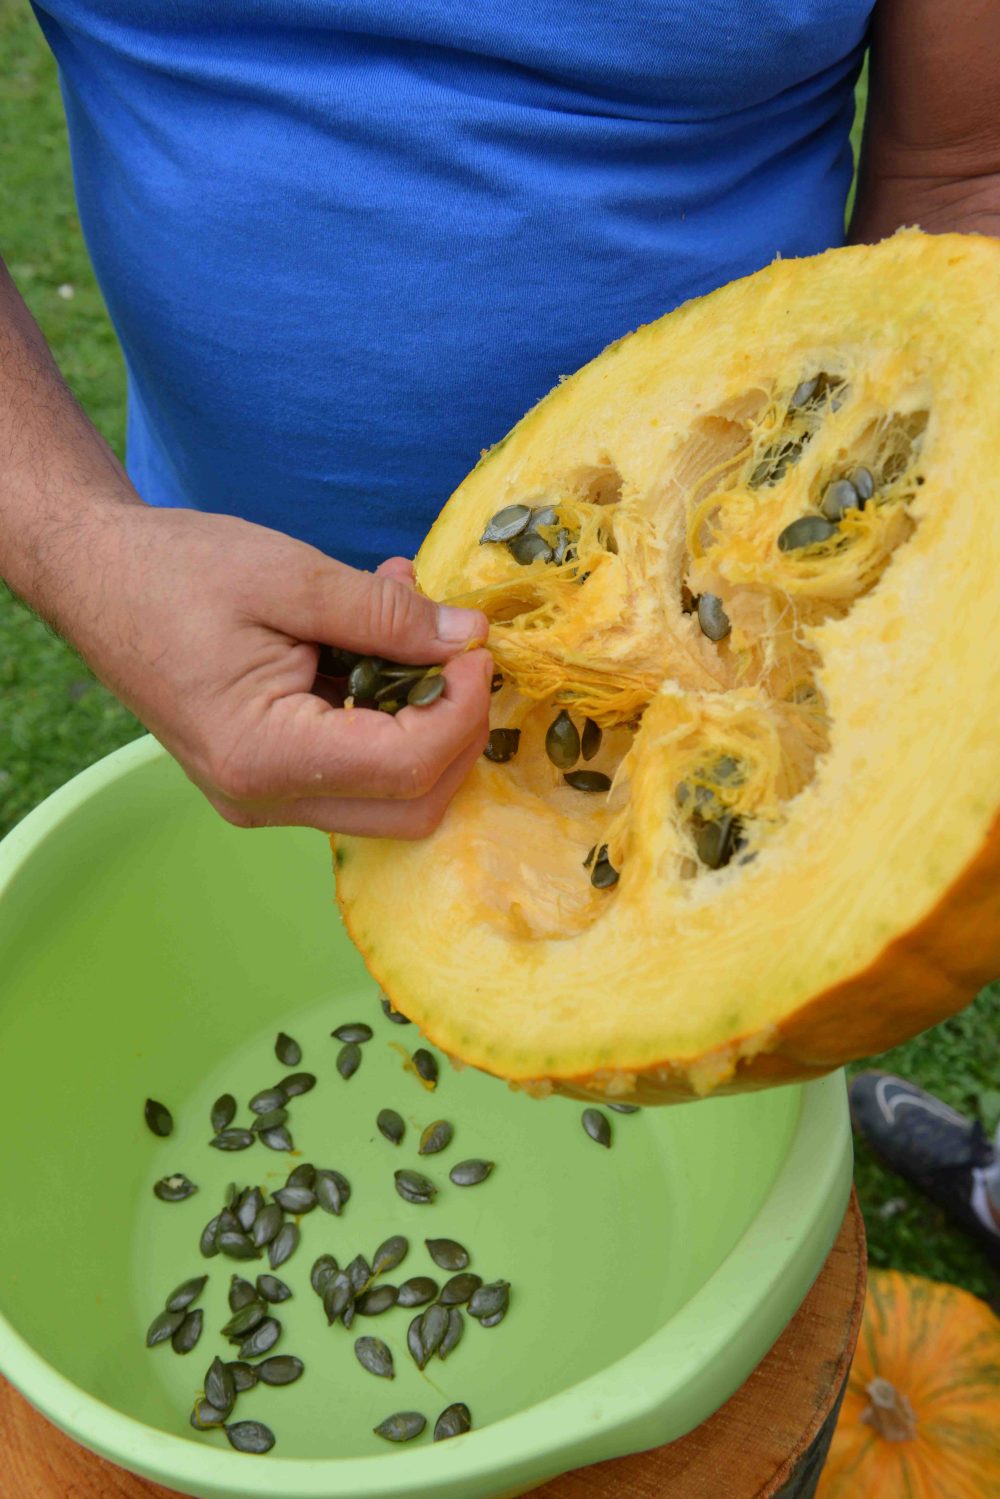 In Croatia, pumpkin seeds are a prize crop used widely in cooking.